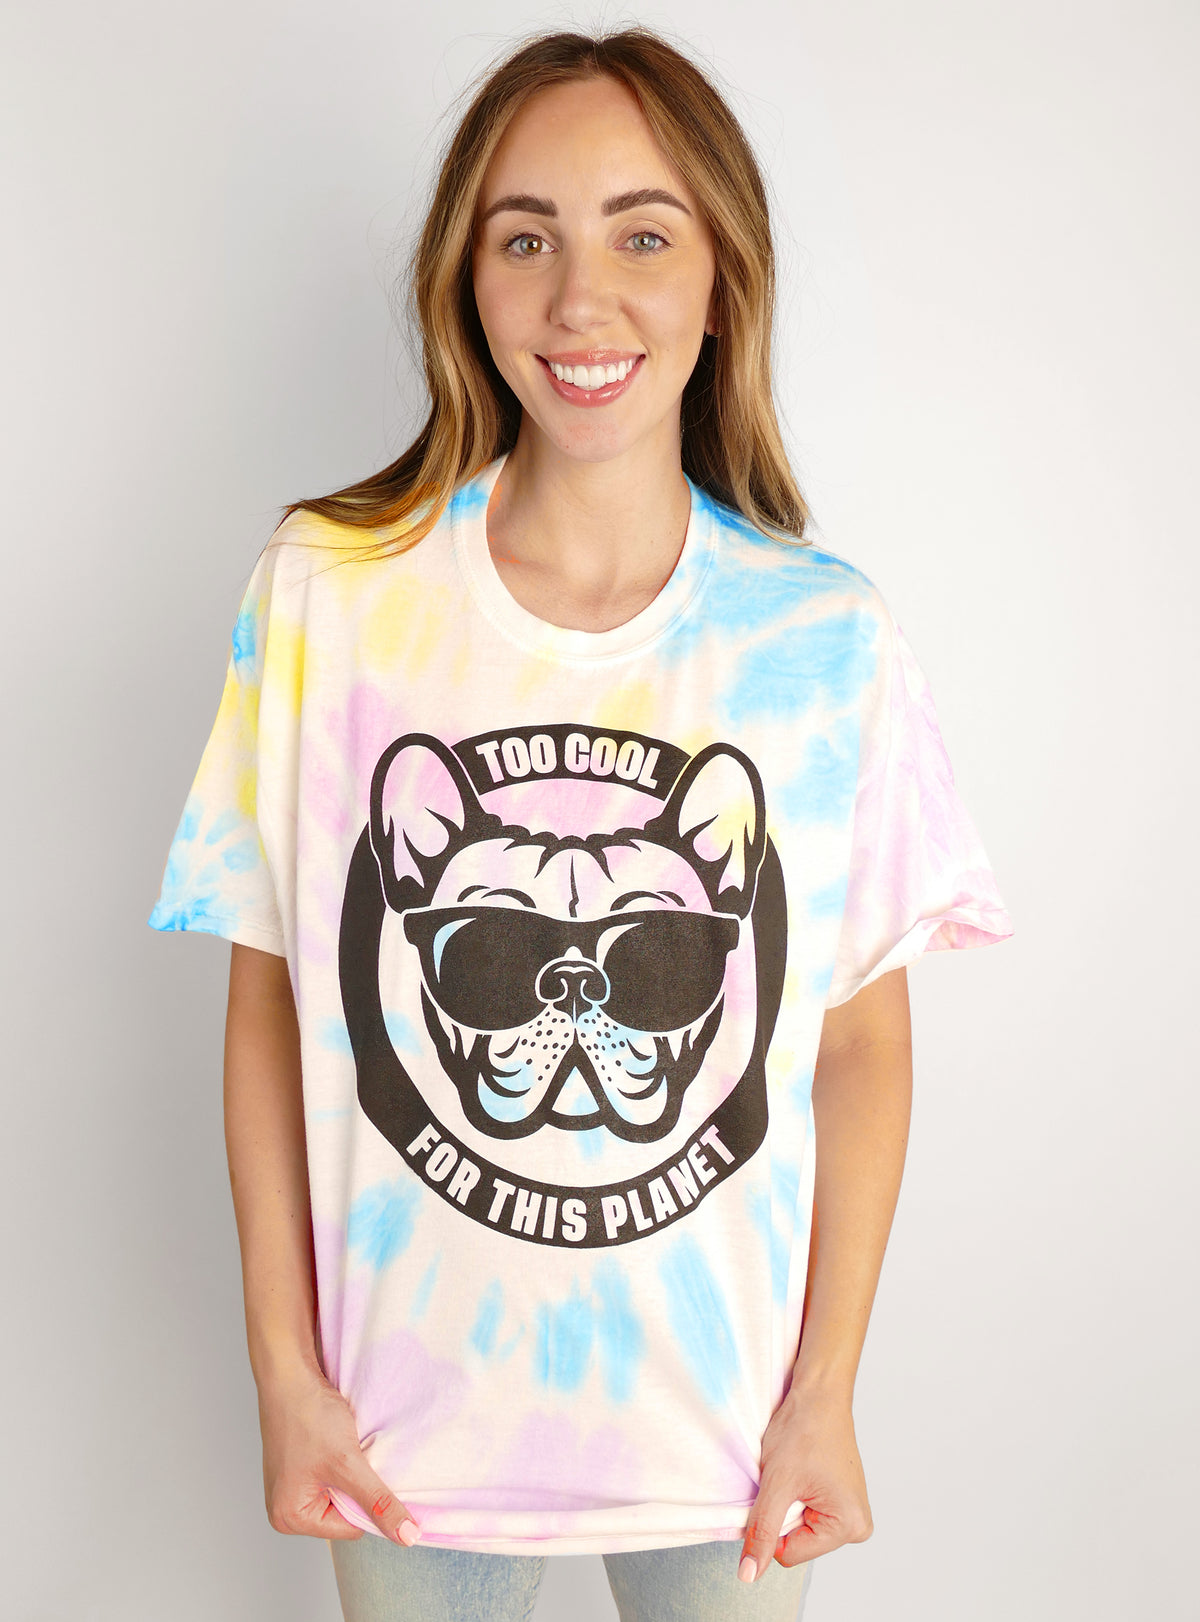 Too Cool For This Planet Tie Dye Tee